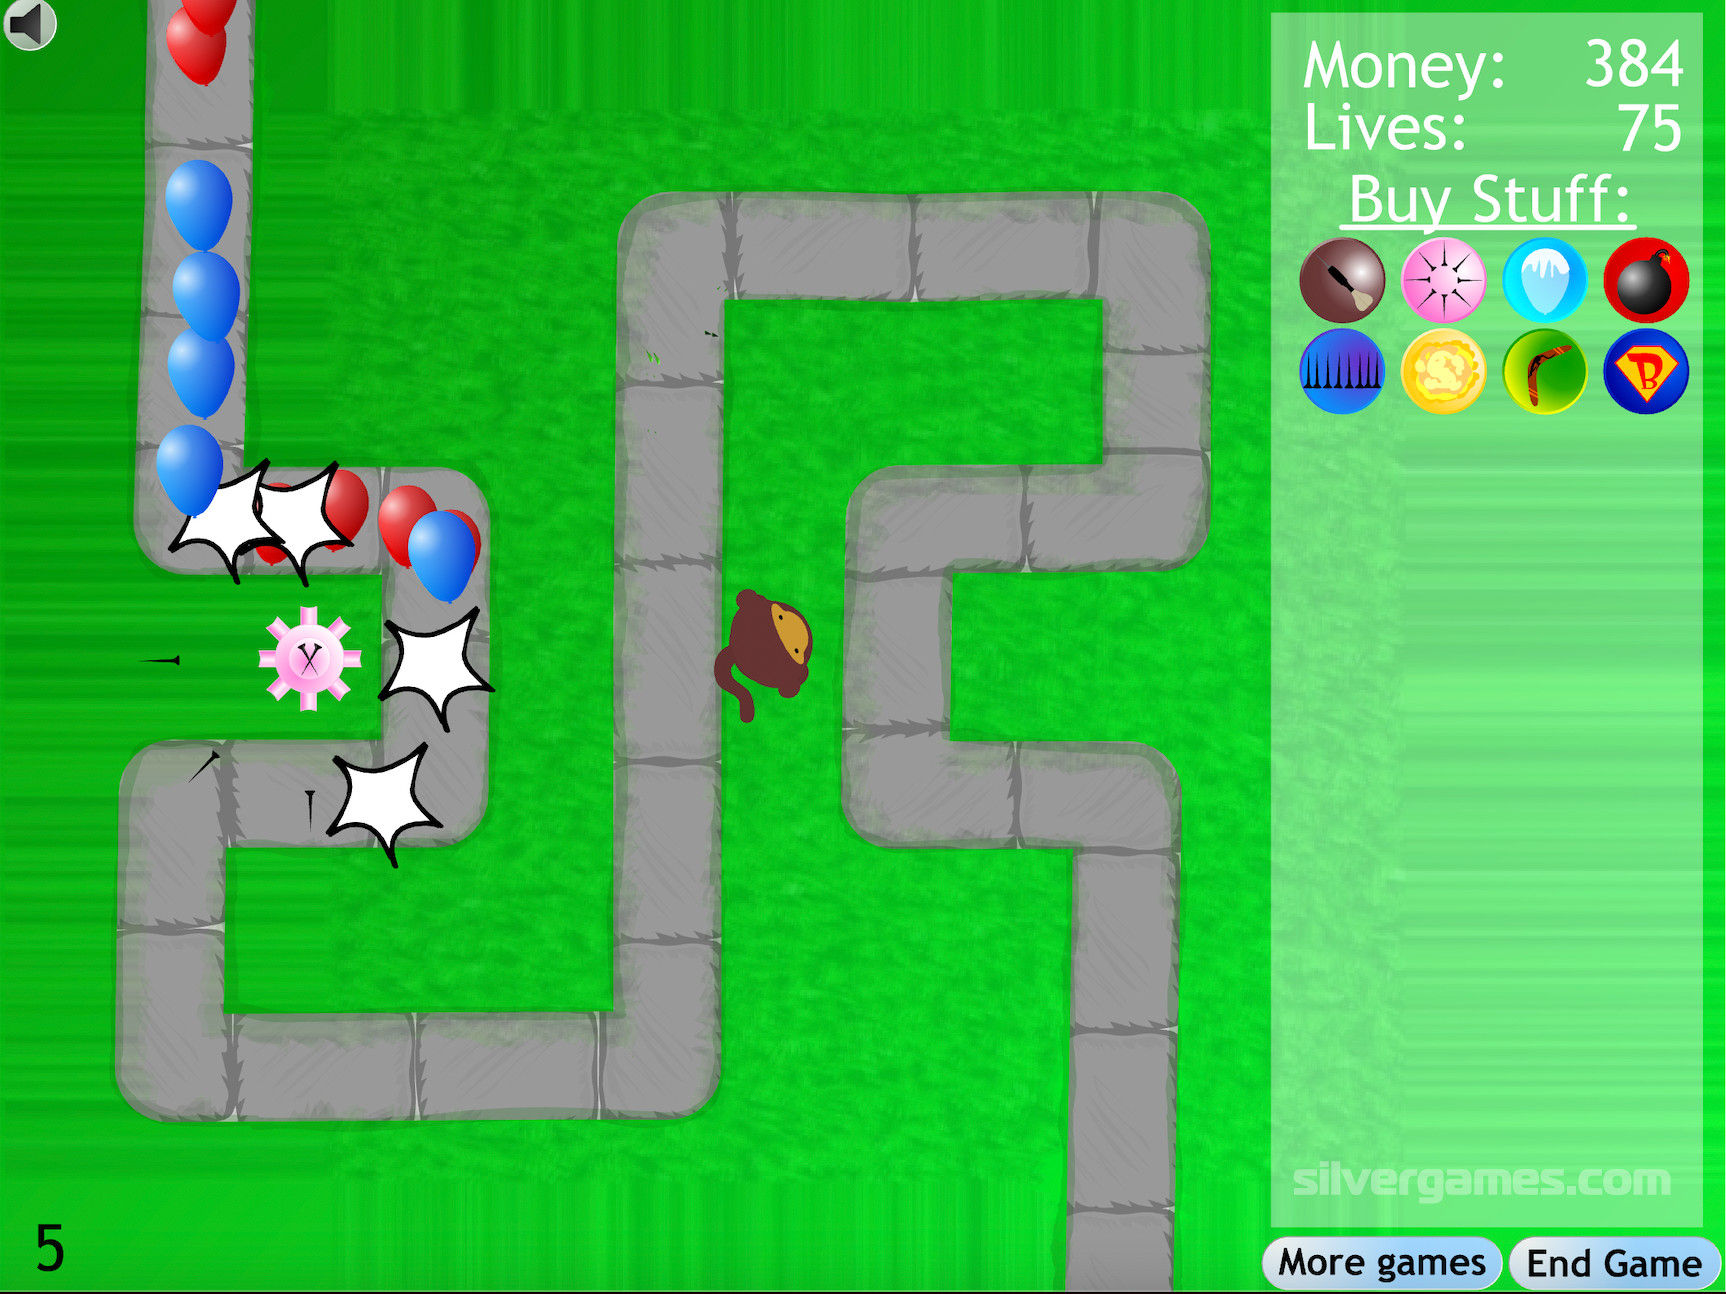 bloons-tower-defense-2-play-online-on-silvergames